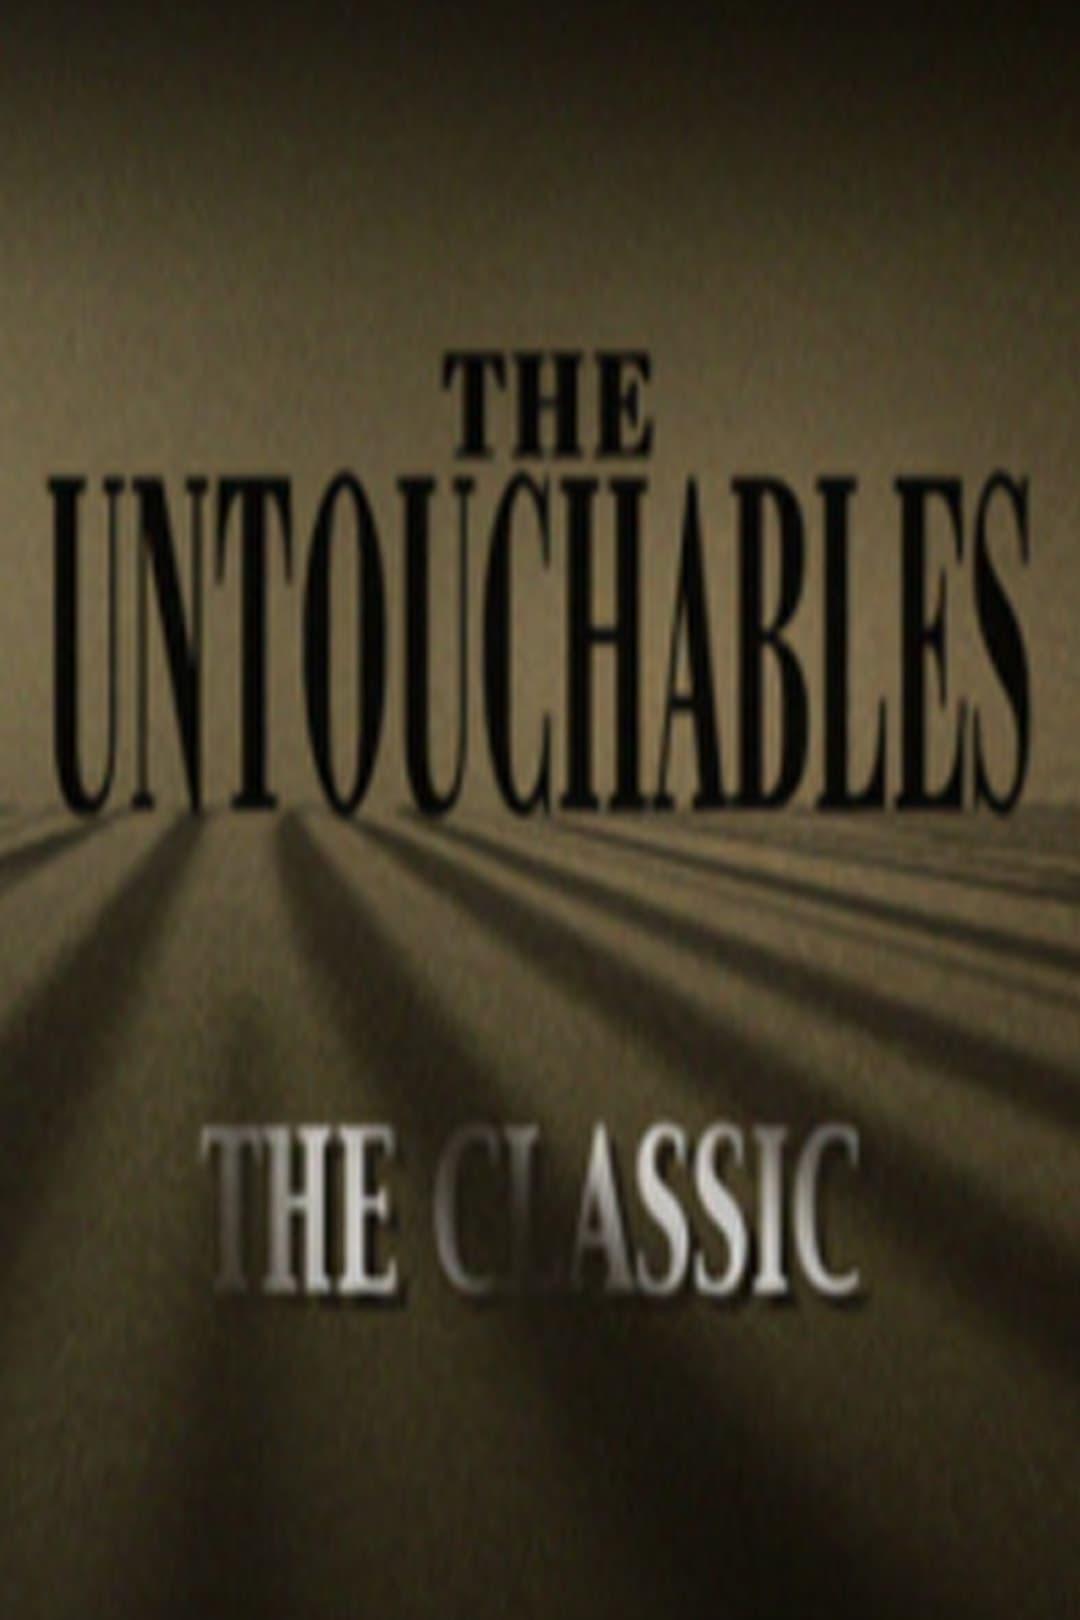 The Untouchables: The Classic poster